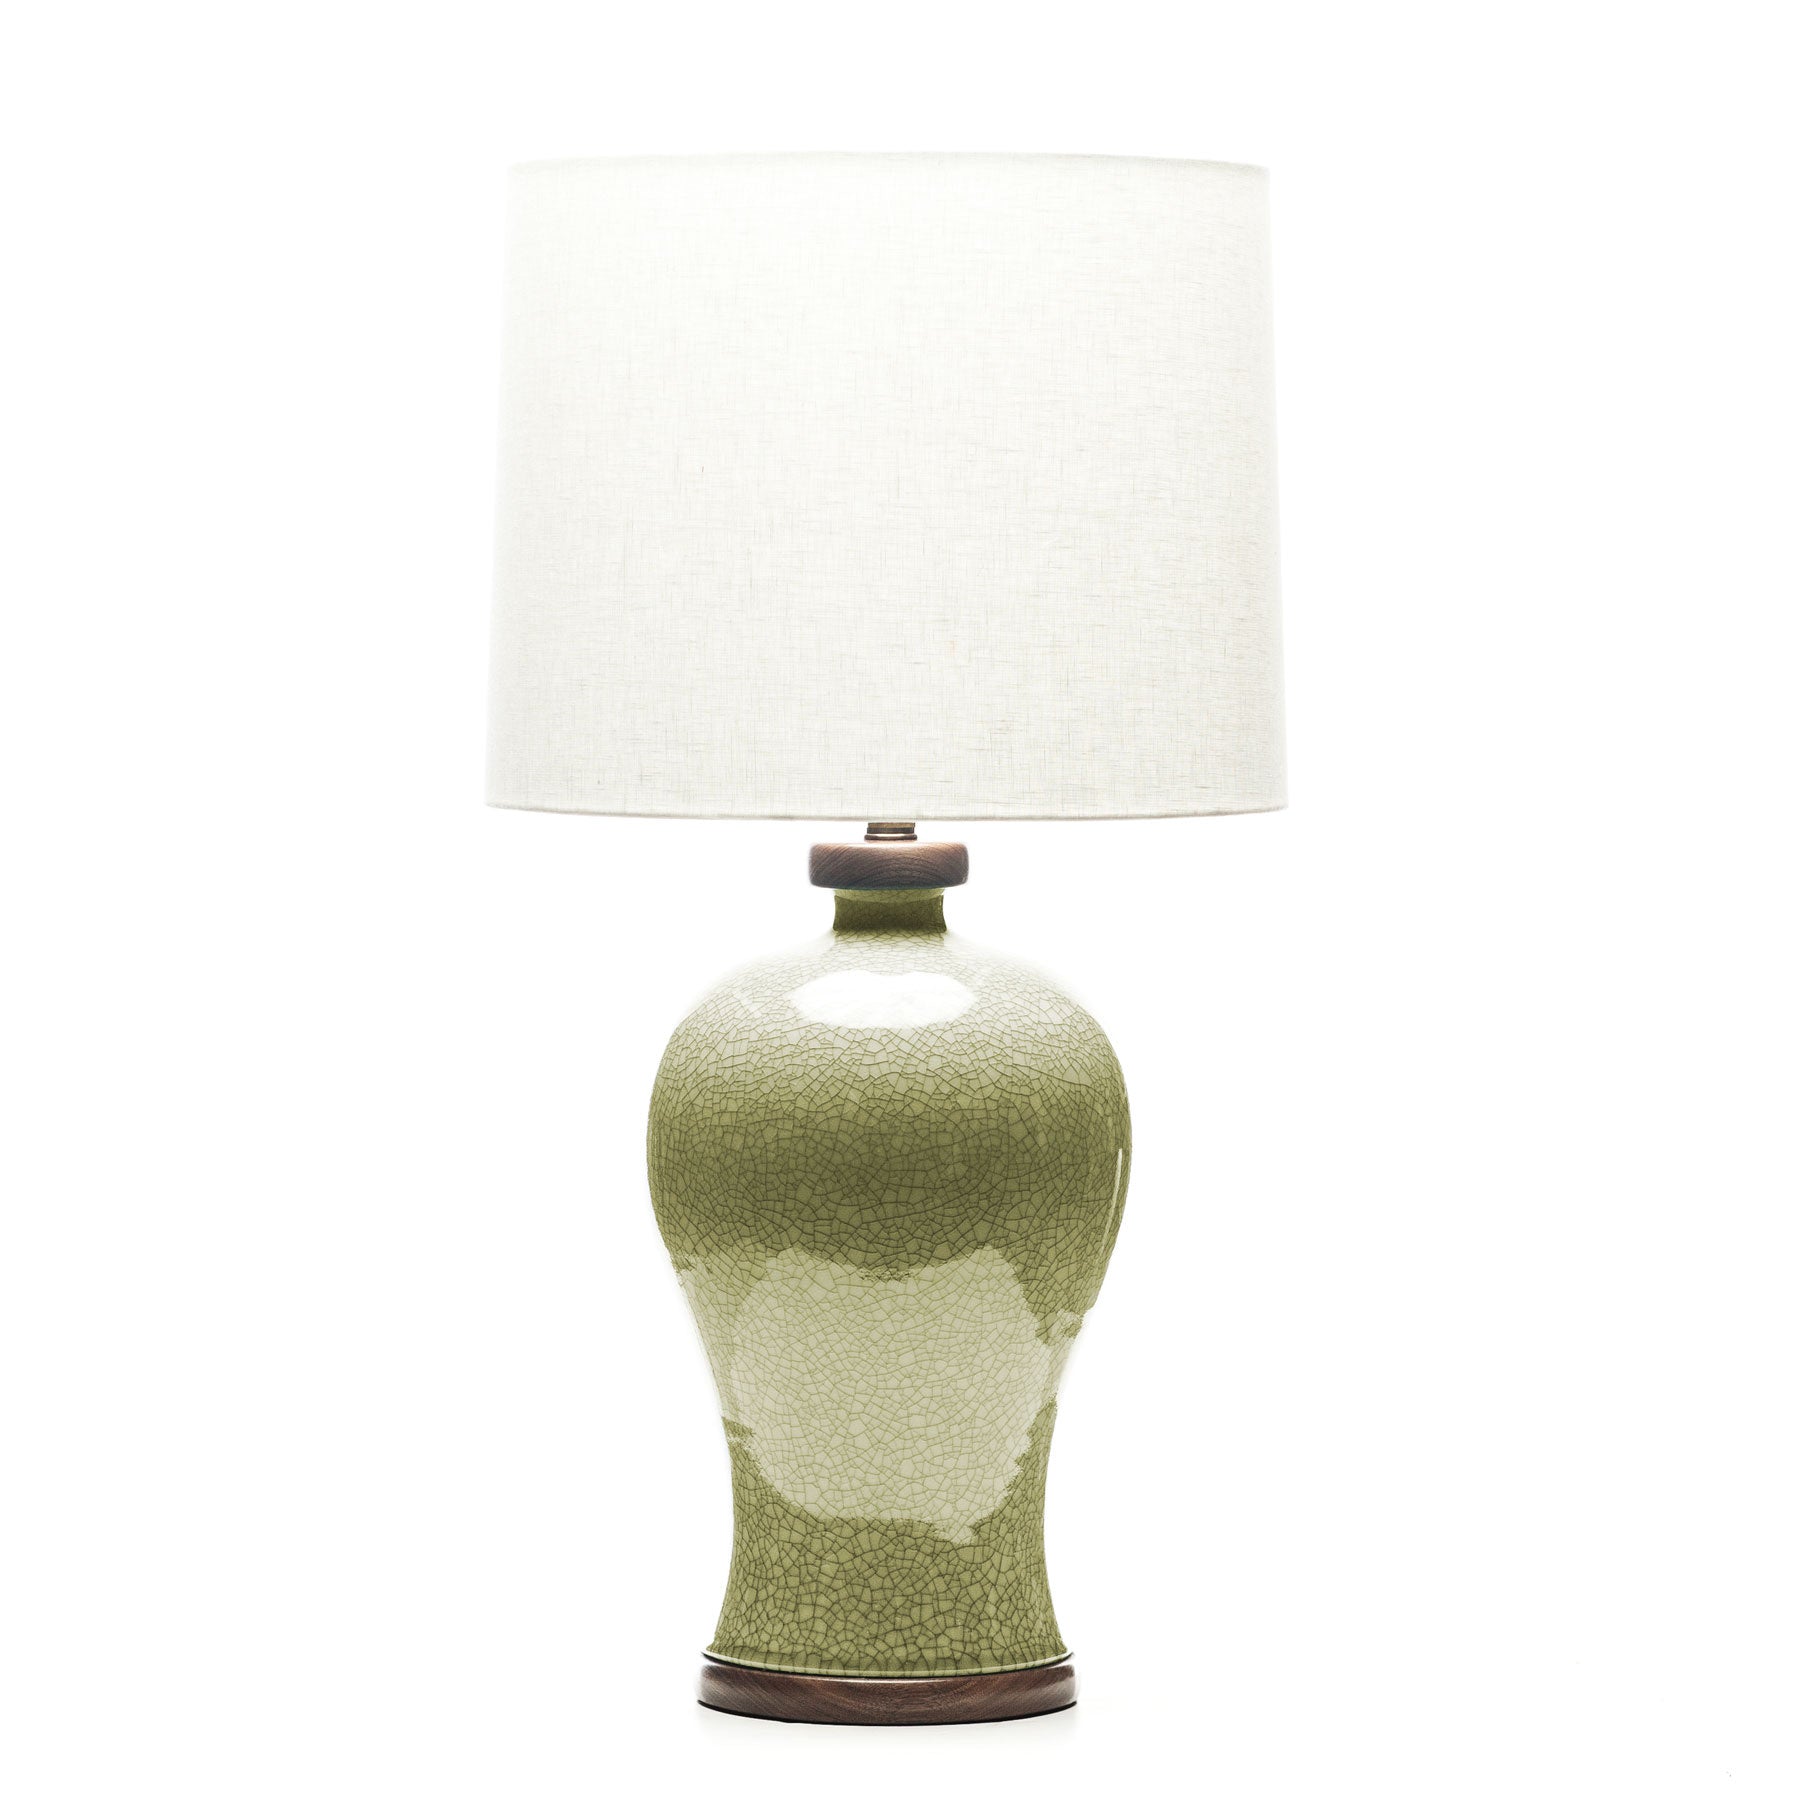 Lawrence & Scott Dashiell Porcelain Table Lamp in Oyster Crackle (walnut) Sample Sale